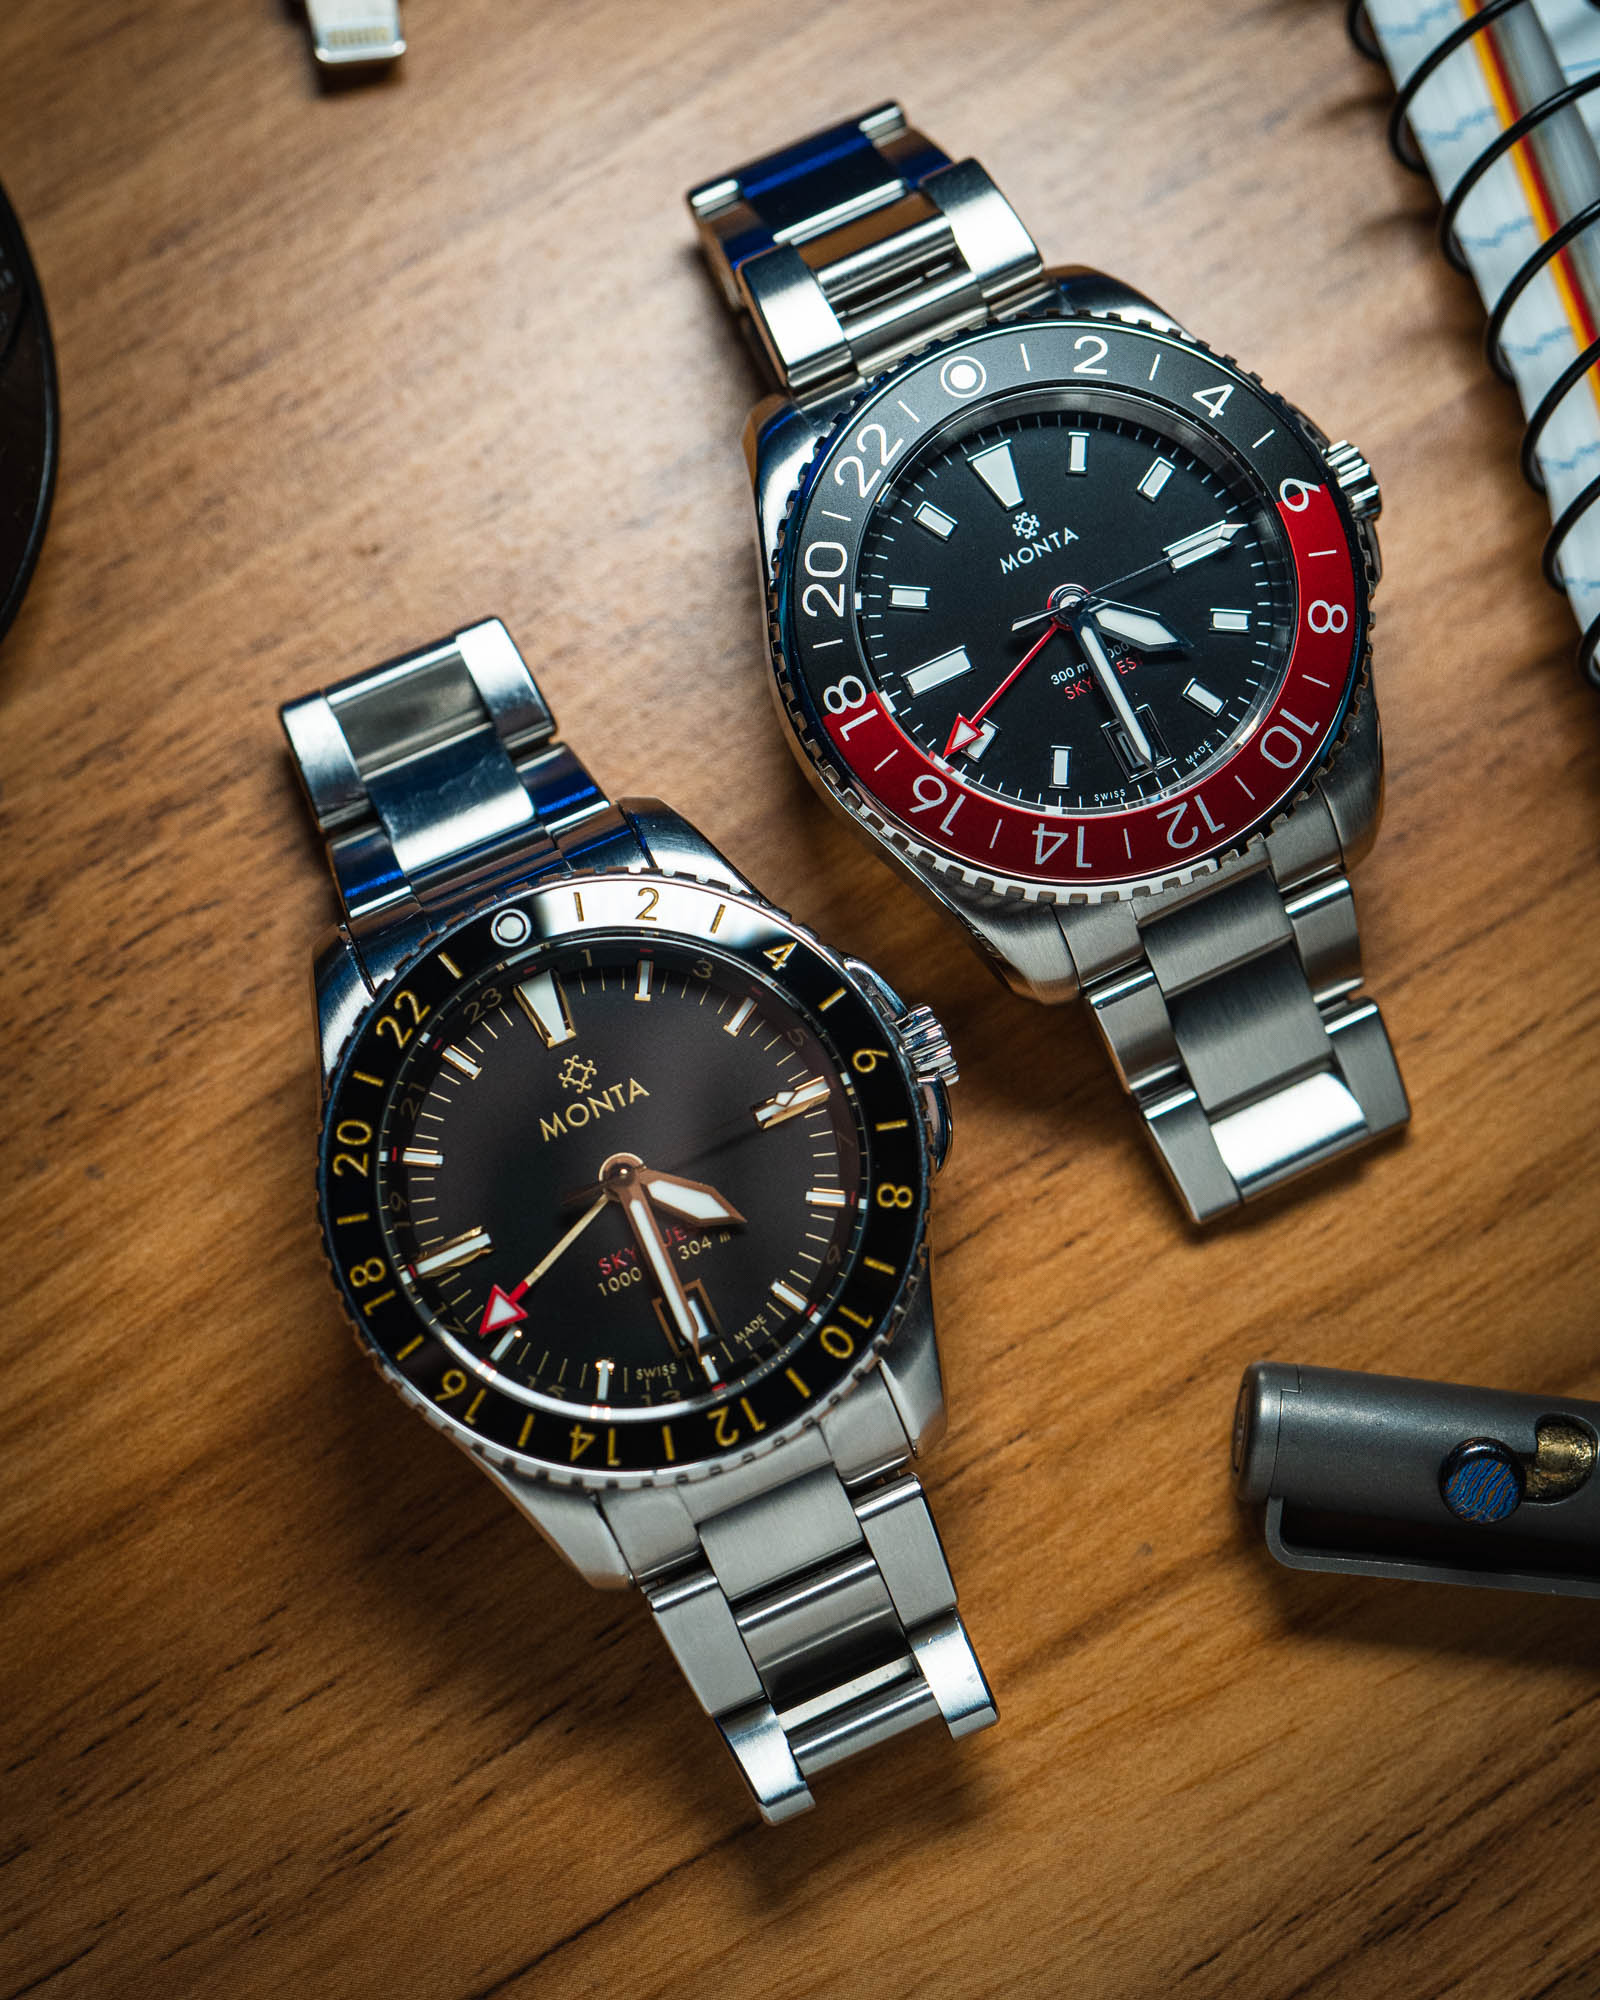 Skyquest GMT Watch Generation 1 And 2